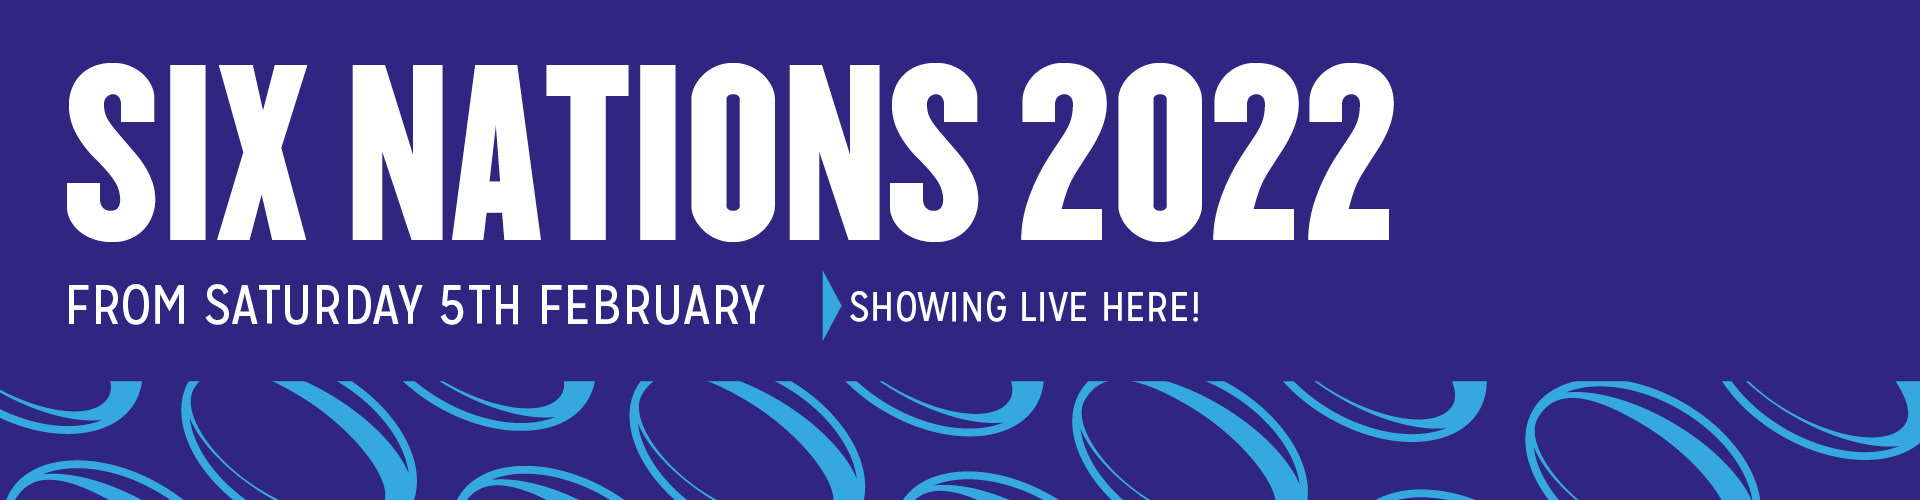 Six Nations 2022 from Saturday 5th February - showing live here!